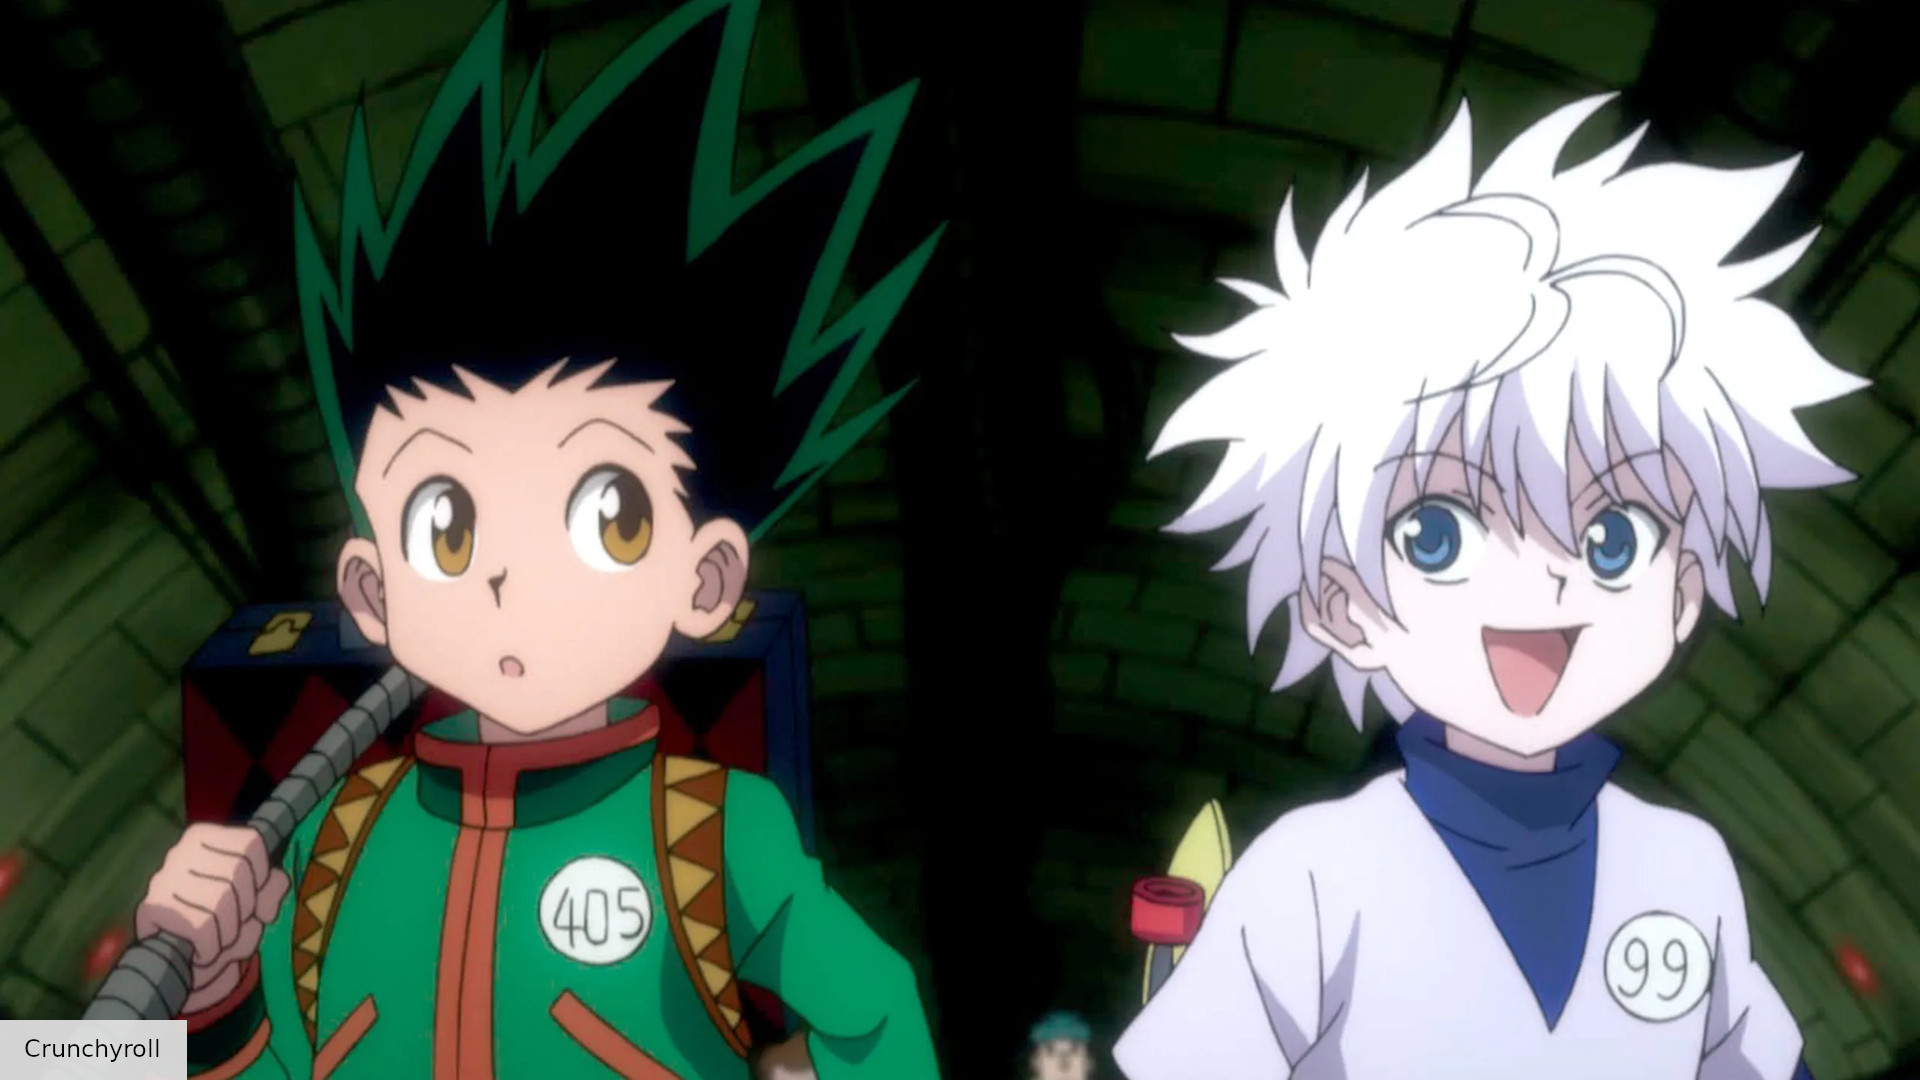 Hunter x Hunter season 7 release date speculation, cast, and more The